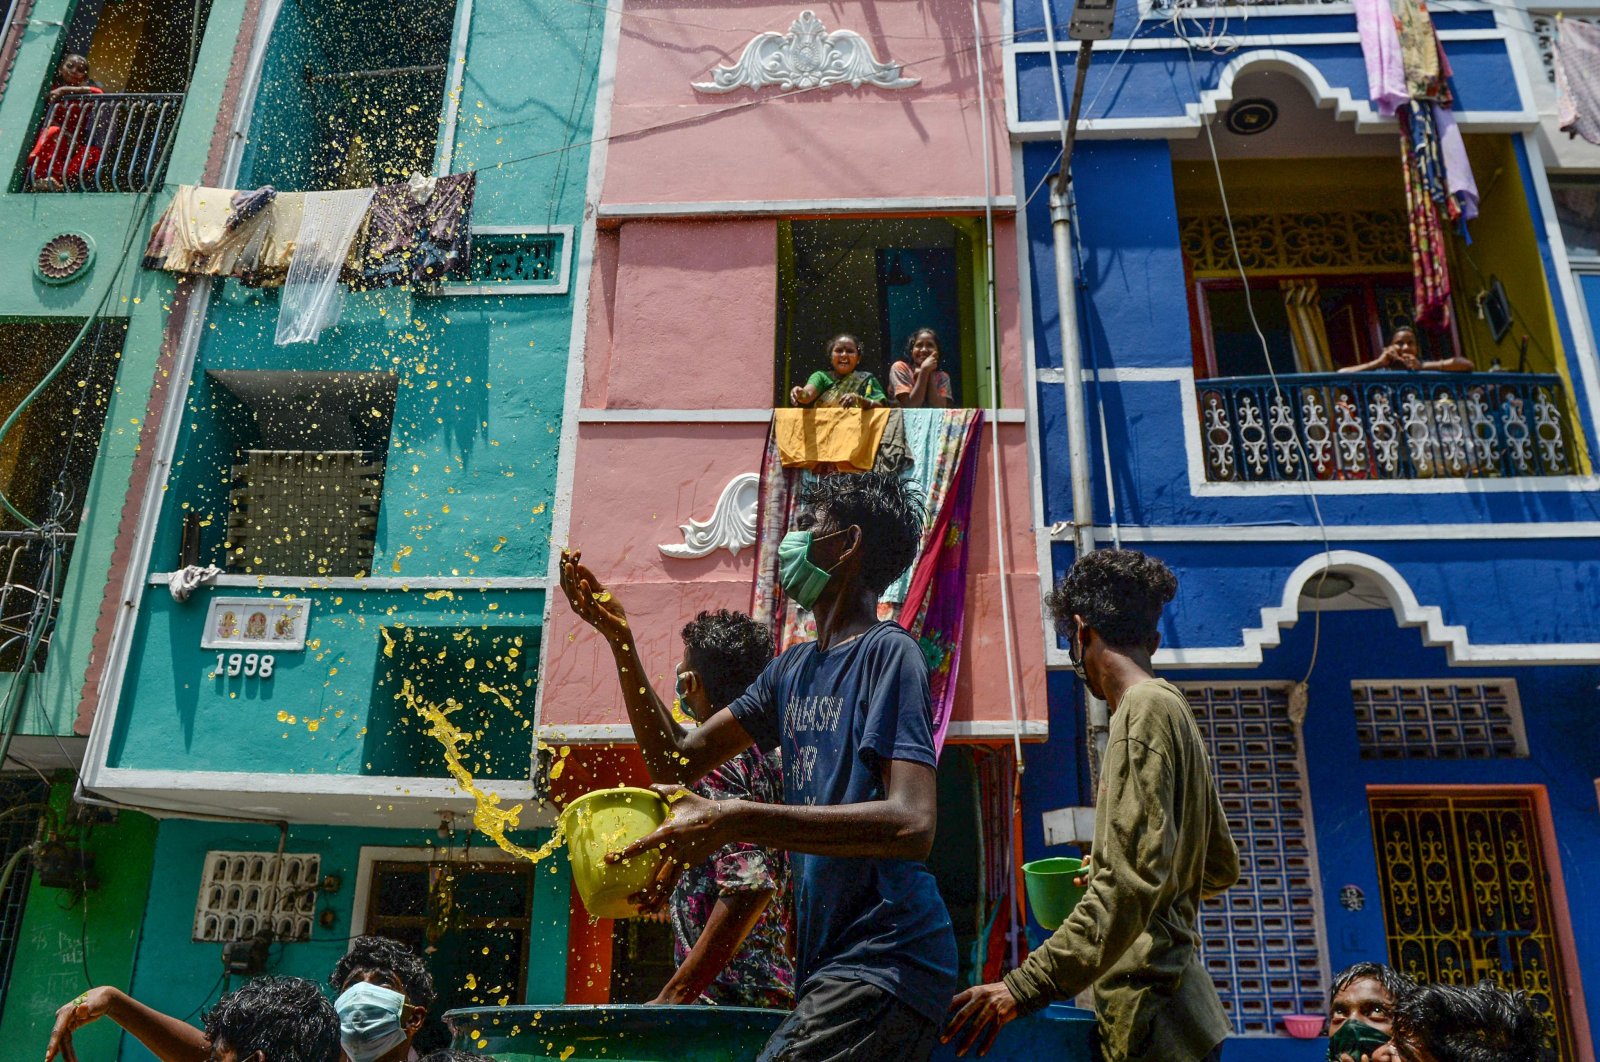 Volunteers throw a mixture of water, neem herb and turmeric – which they tout as a natural disinfectant – on a street in a residential area during a government-imposed nationwide lockdown prompted by the coronavirus pandemic, Chennai, Tuesday, April 7, 2020. (AFP Photo)